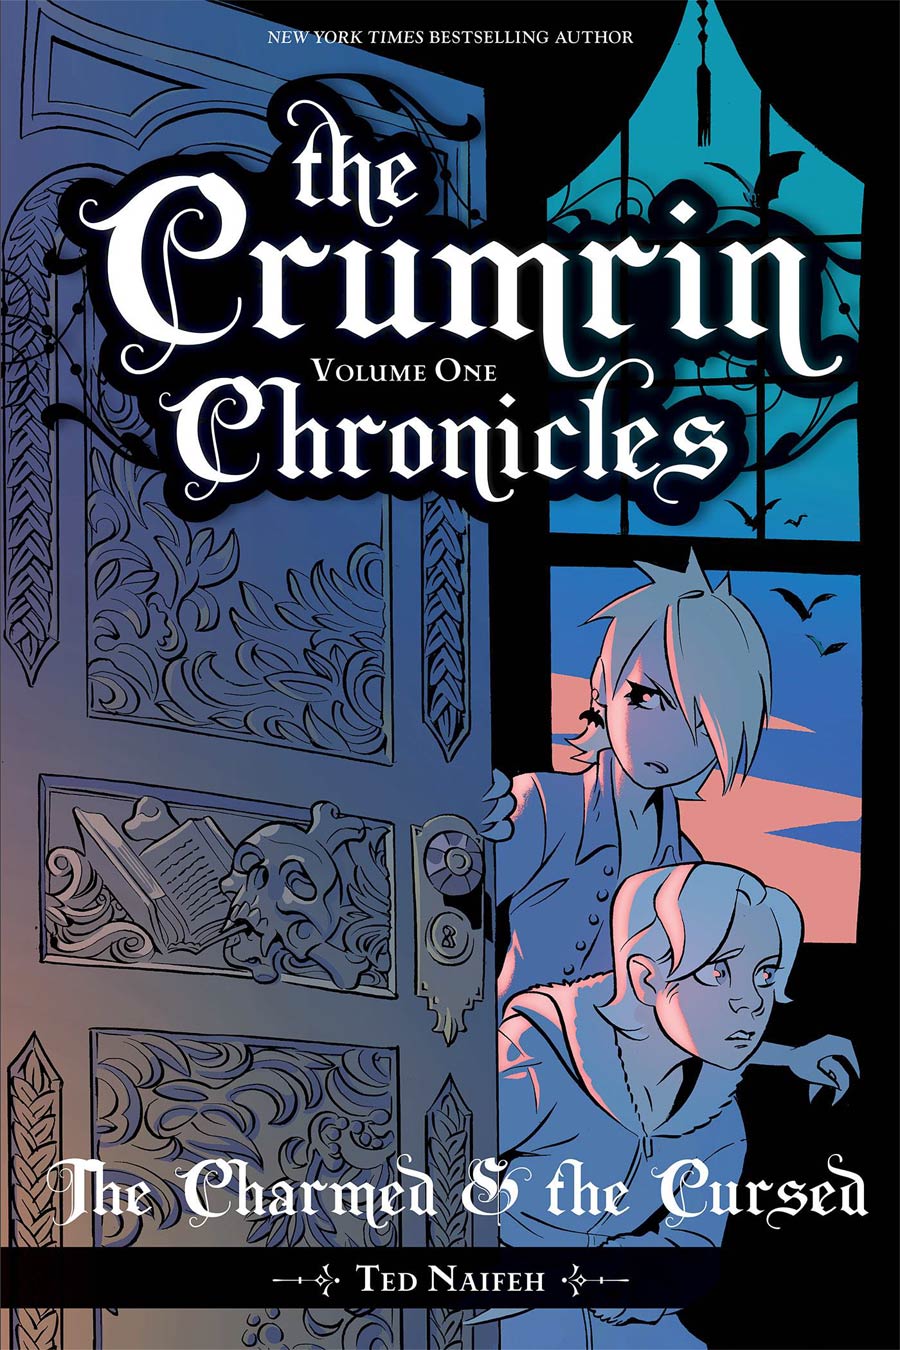 Crumrin Chronicles Vol 1 The Charmed And The Cursed TP